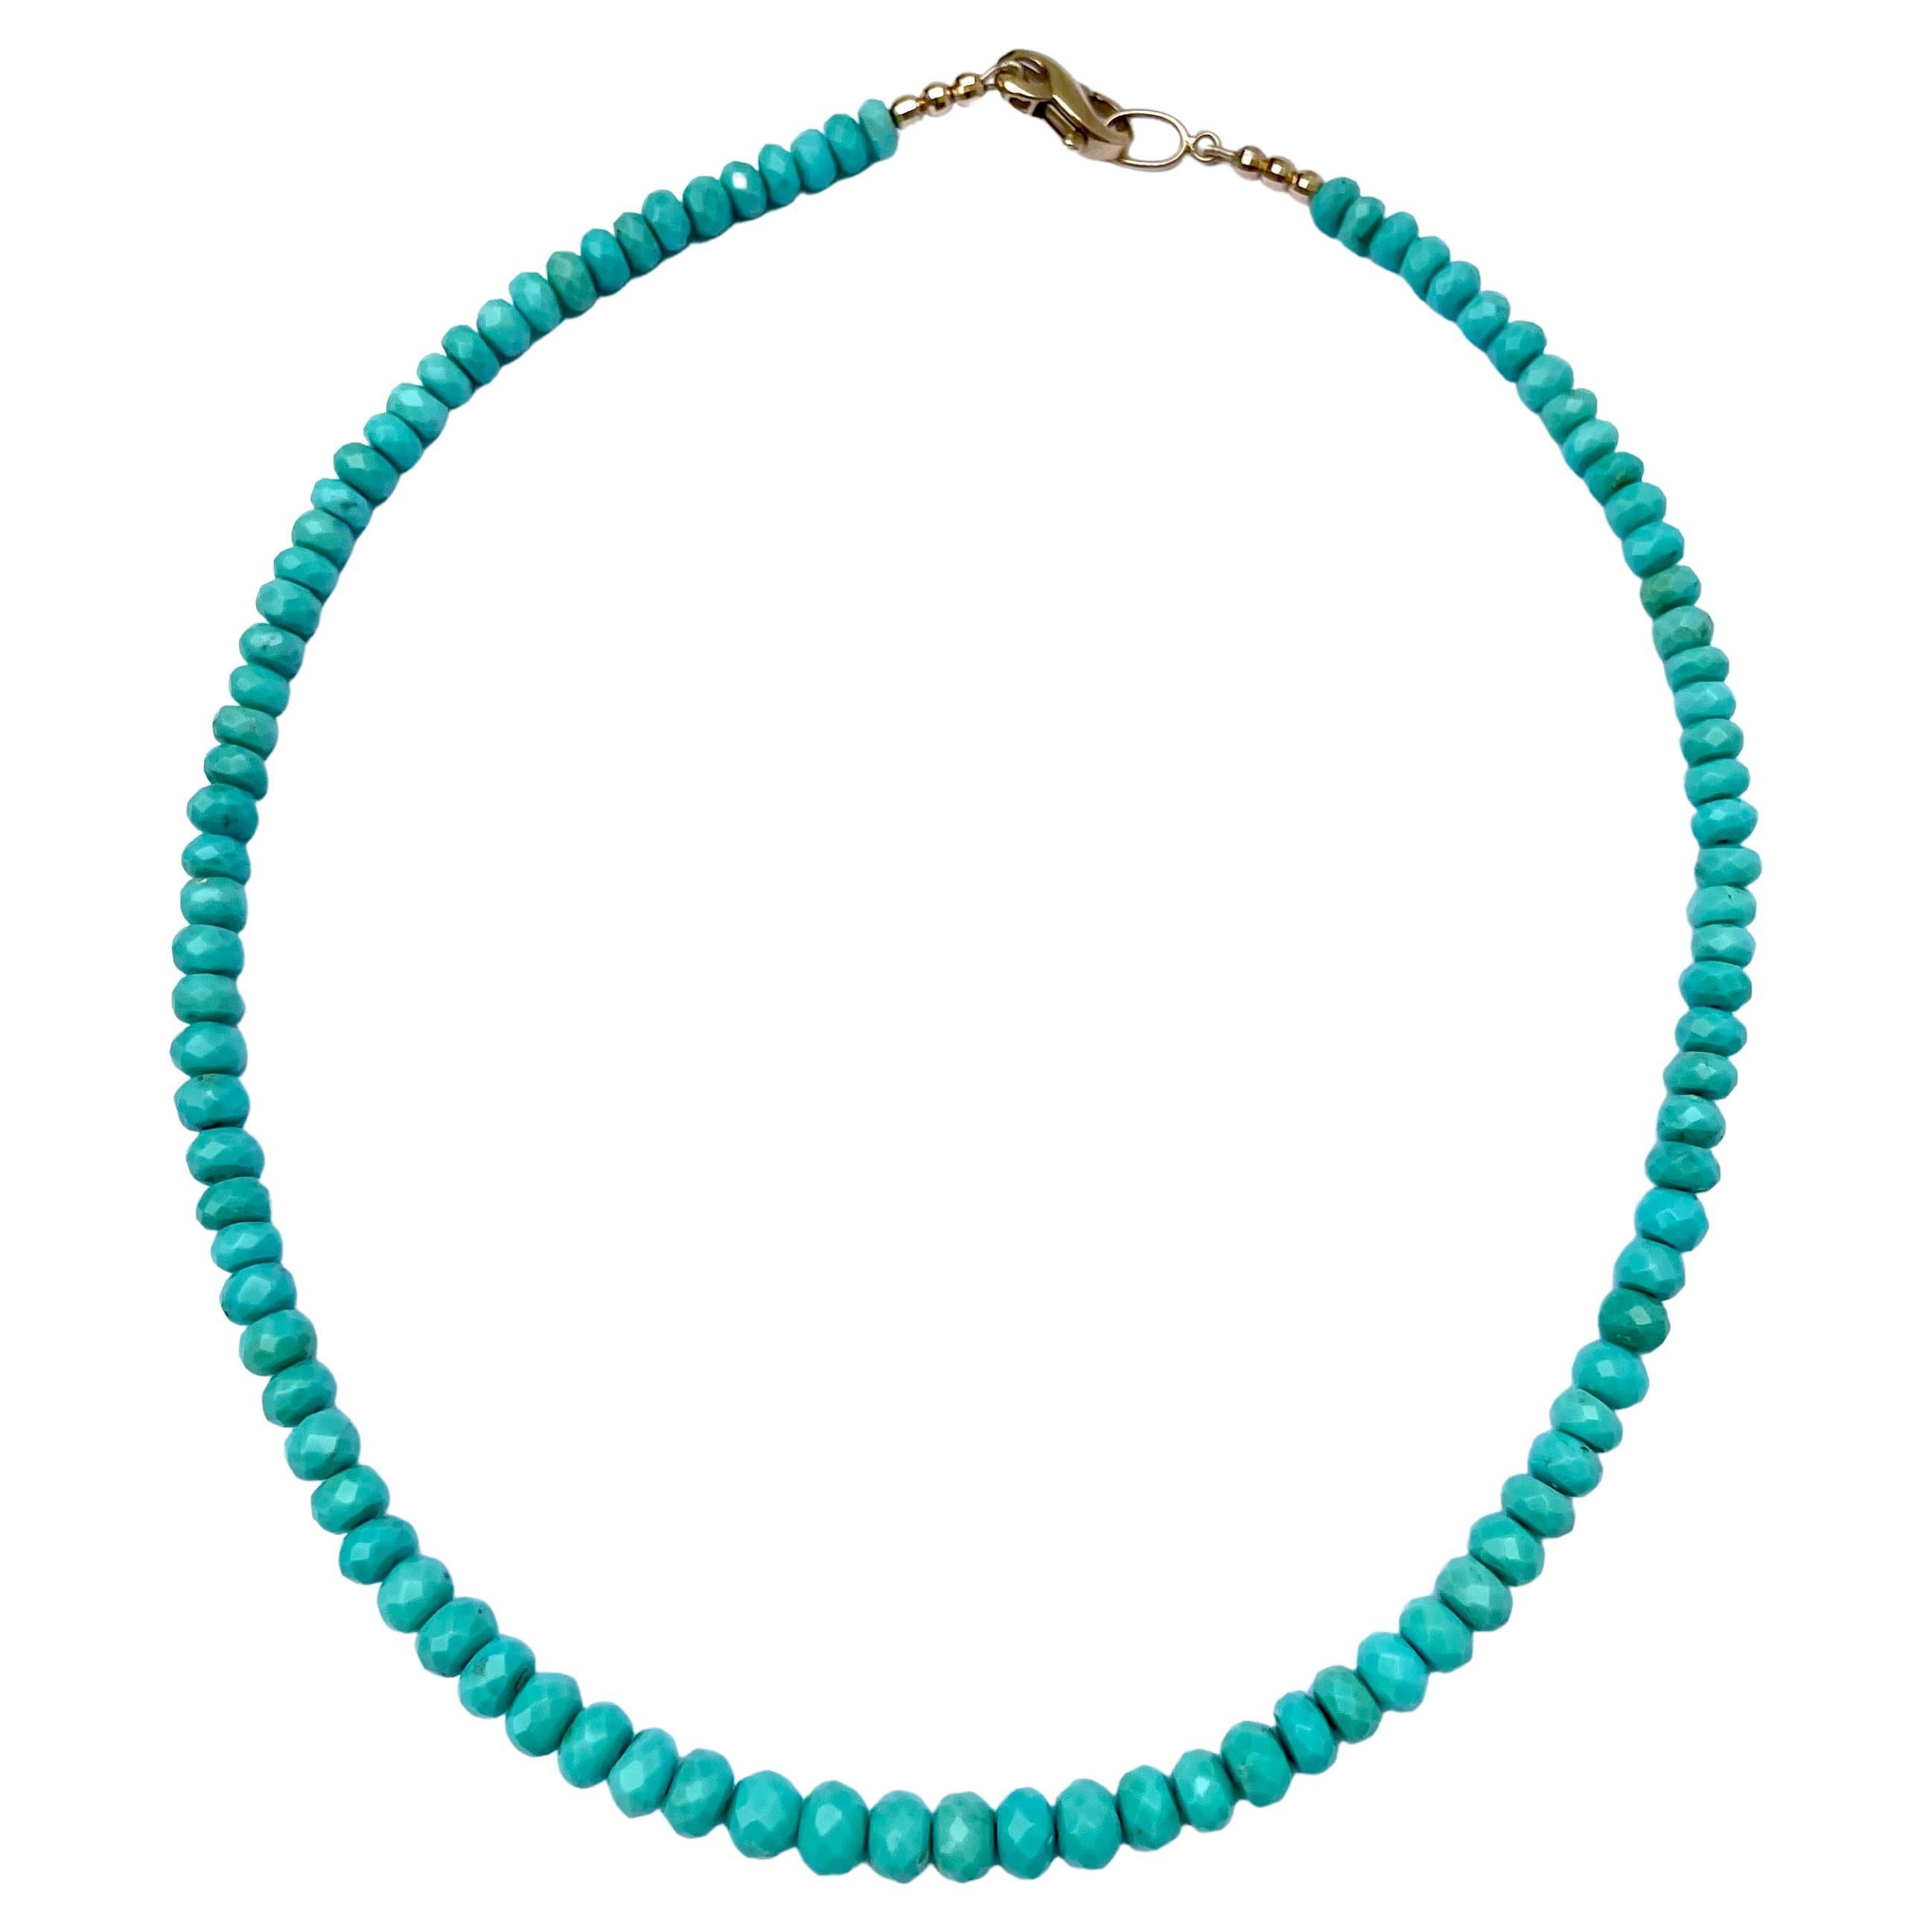 Sleeping Beauty Turquoise Necklace In New Condition For Sale In Laguna Beach, CA